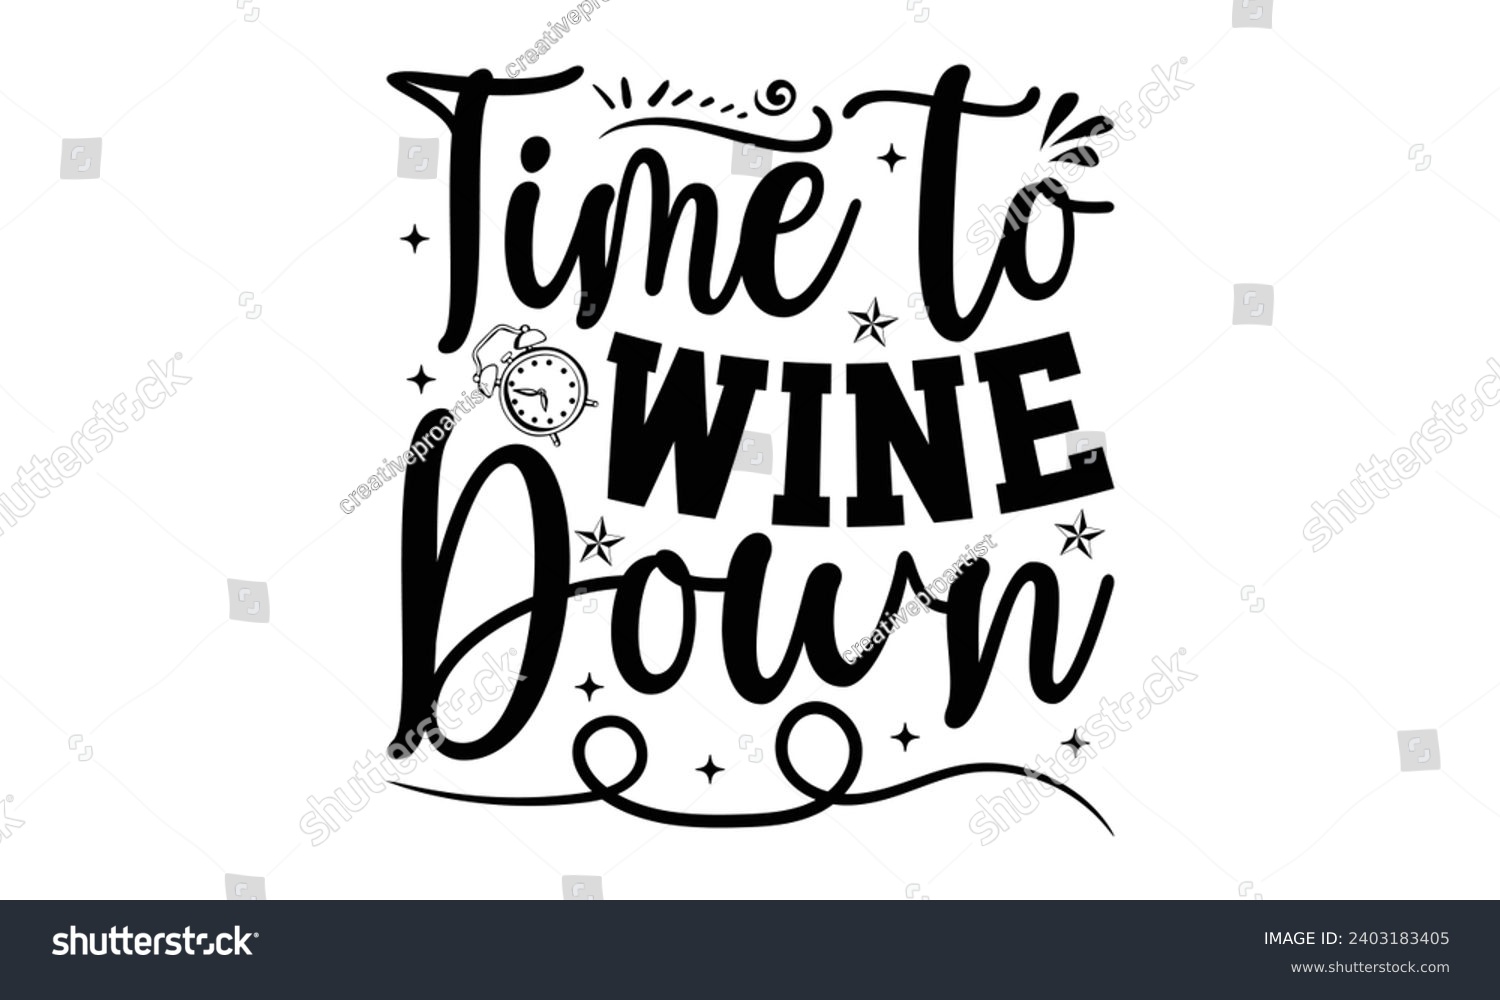 SVG of Time To Wine Down- Alcohol t- shirt design, Hand drawn vintage illustration with hand-lettering and decoration elements, greeting card template with typography text svg